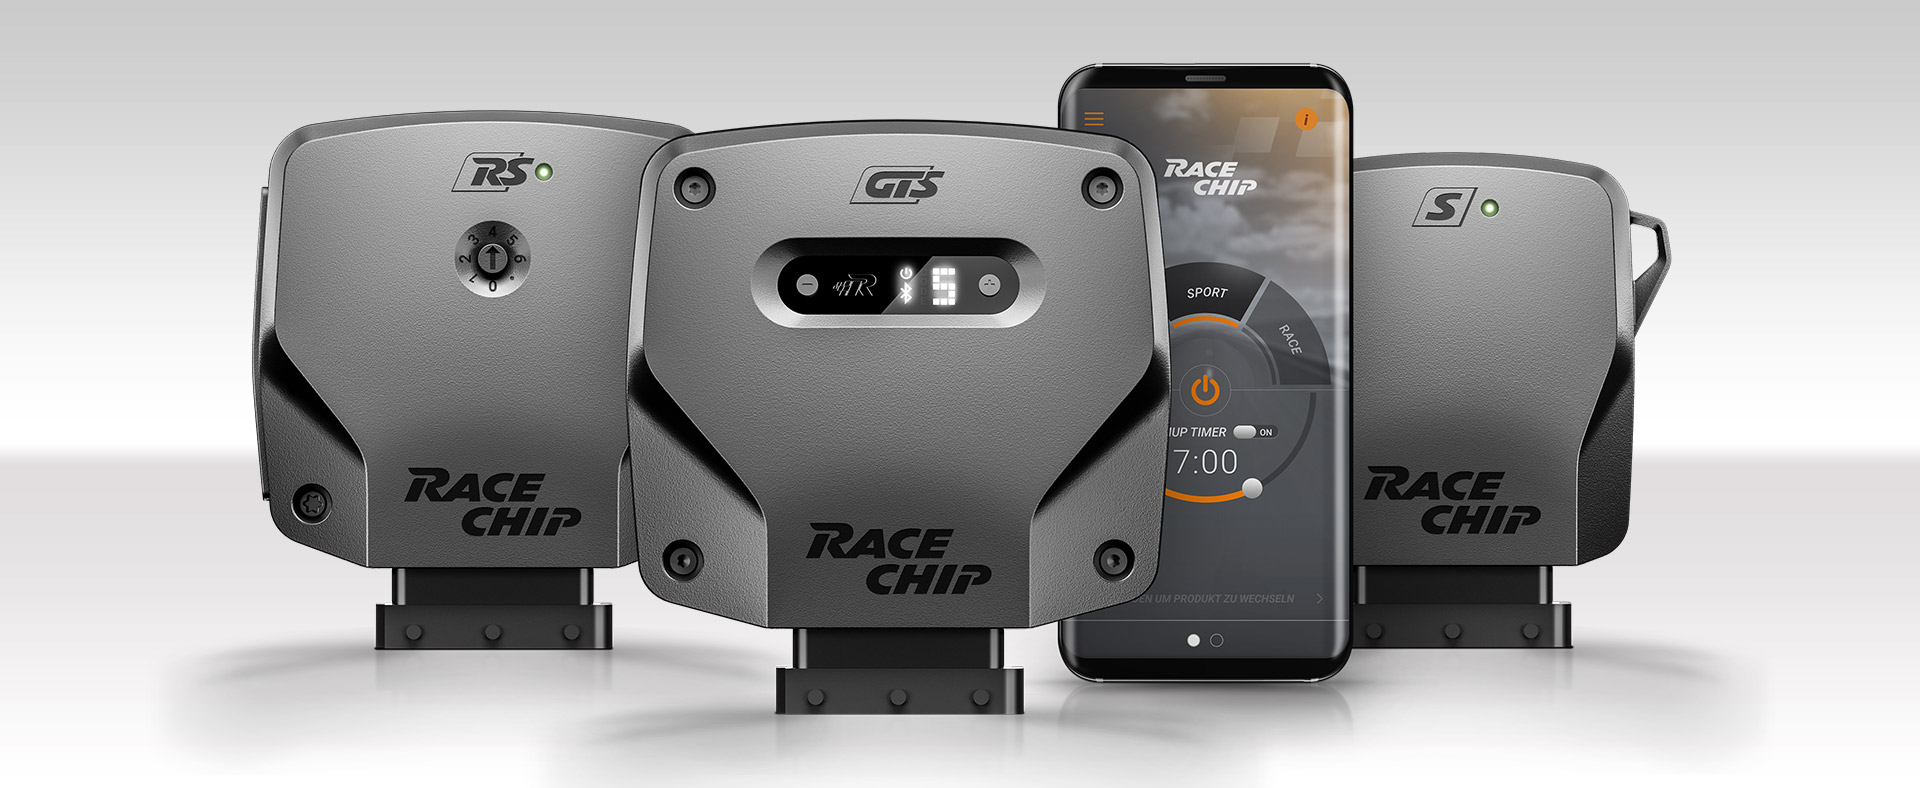 RaceChip unleashes true potential of the Kia Stinger GT